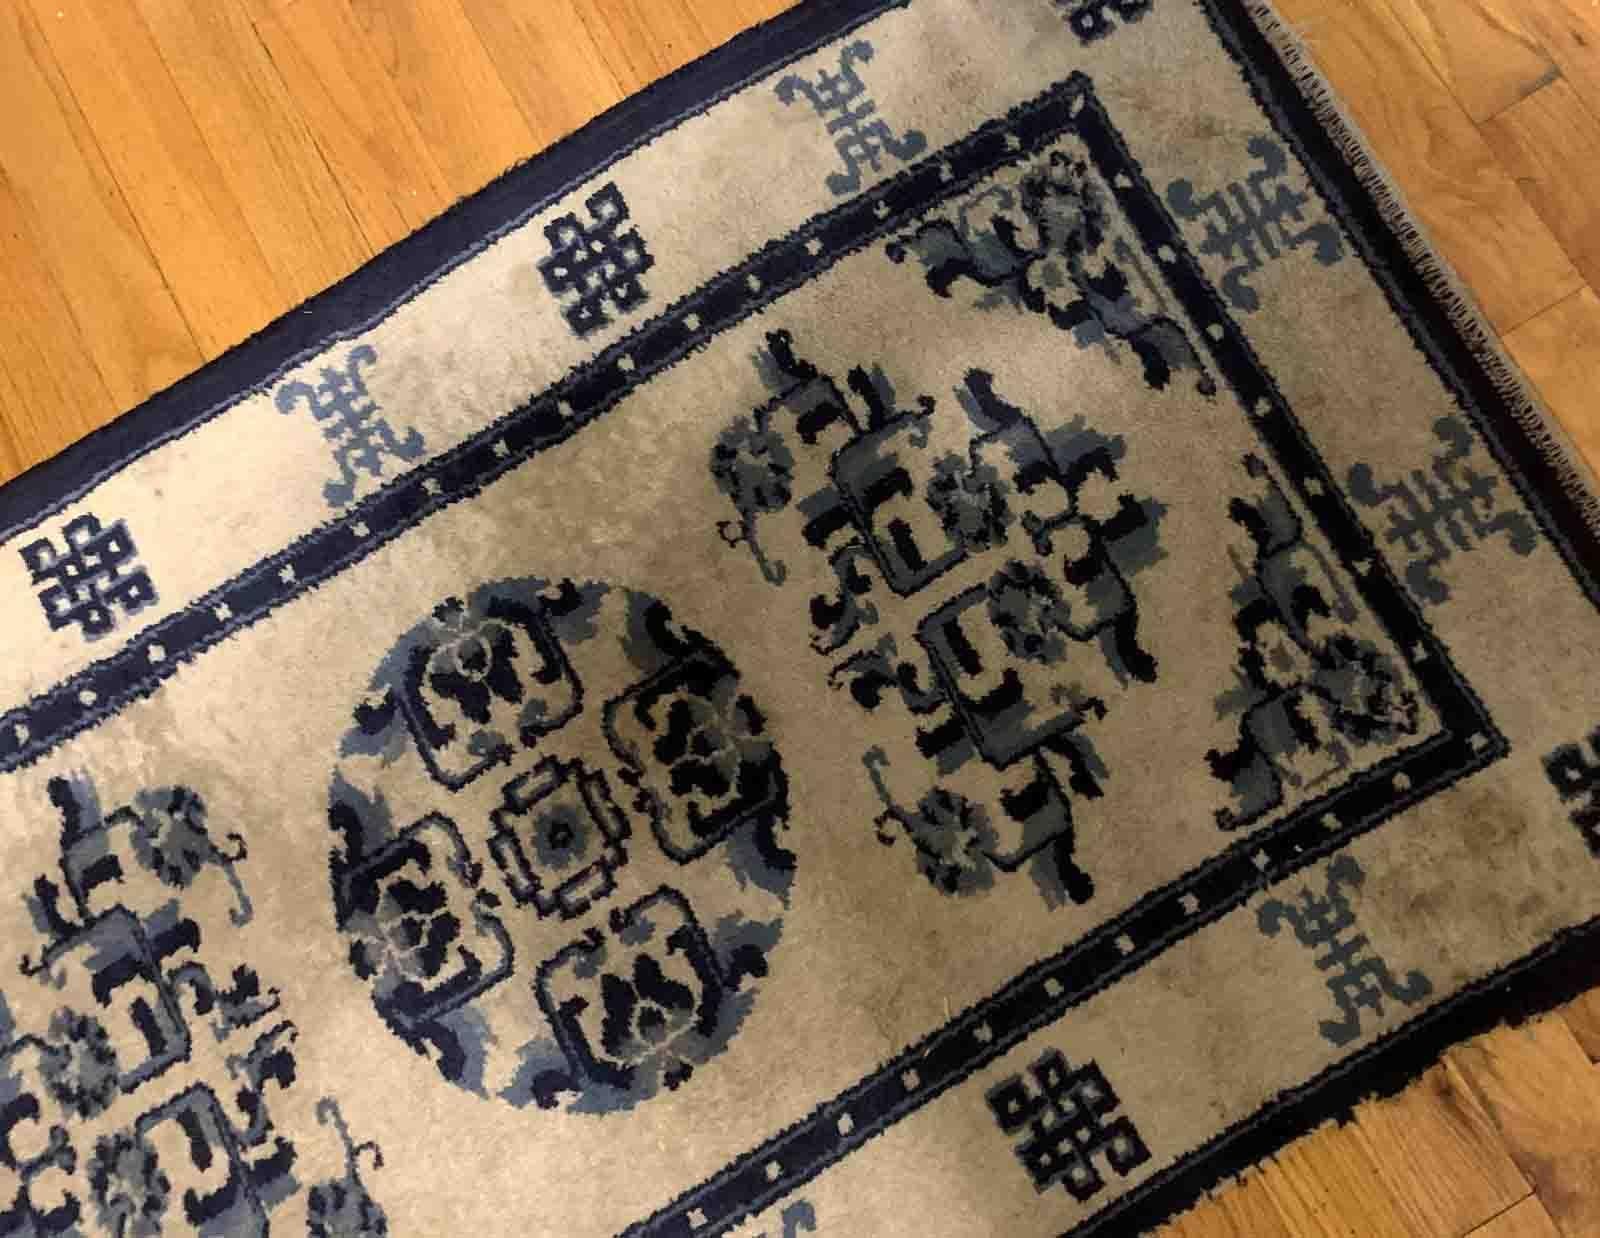 Handmade antique Peking Chinese rug in beige and blue colours. The rug is from the beginning of 20th century in original good condition.

-condition: original good,

-circa: 1900s,

-size: 2.2' x 3.11' (67cm x 119cm),
?
-material: